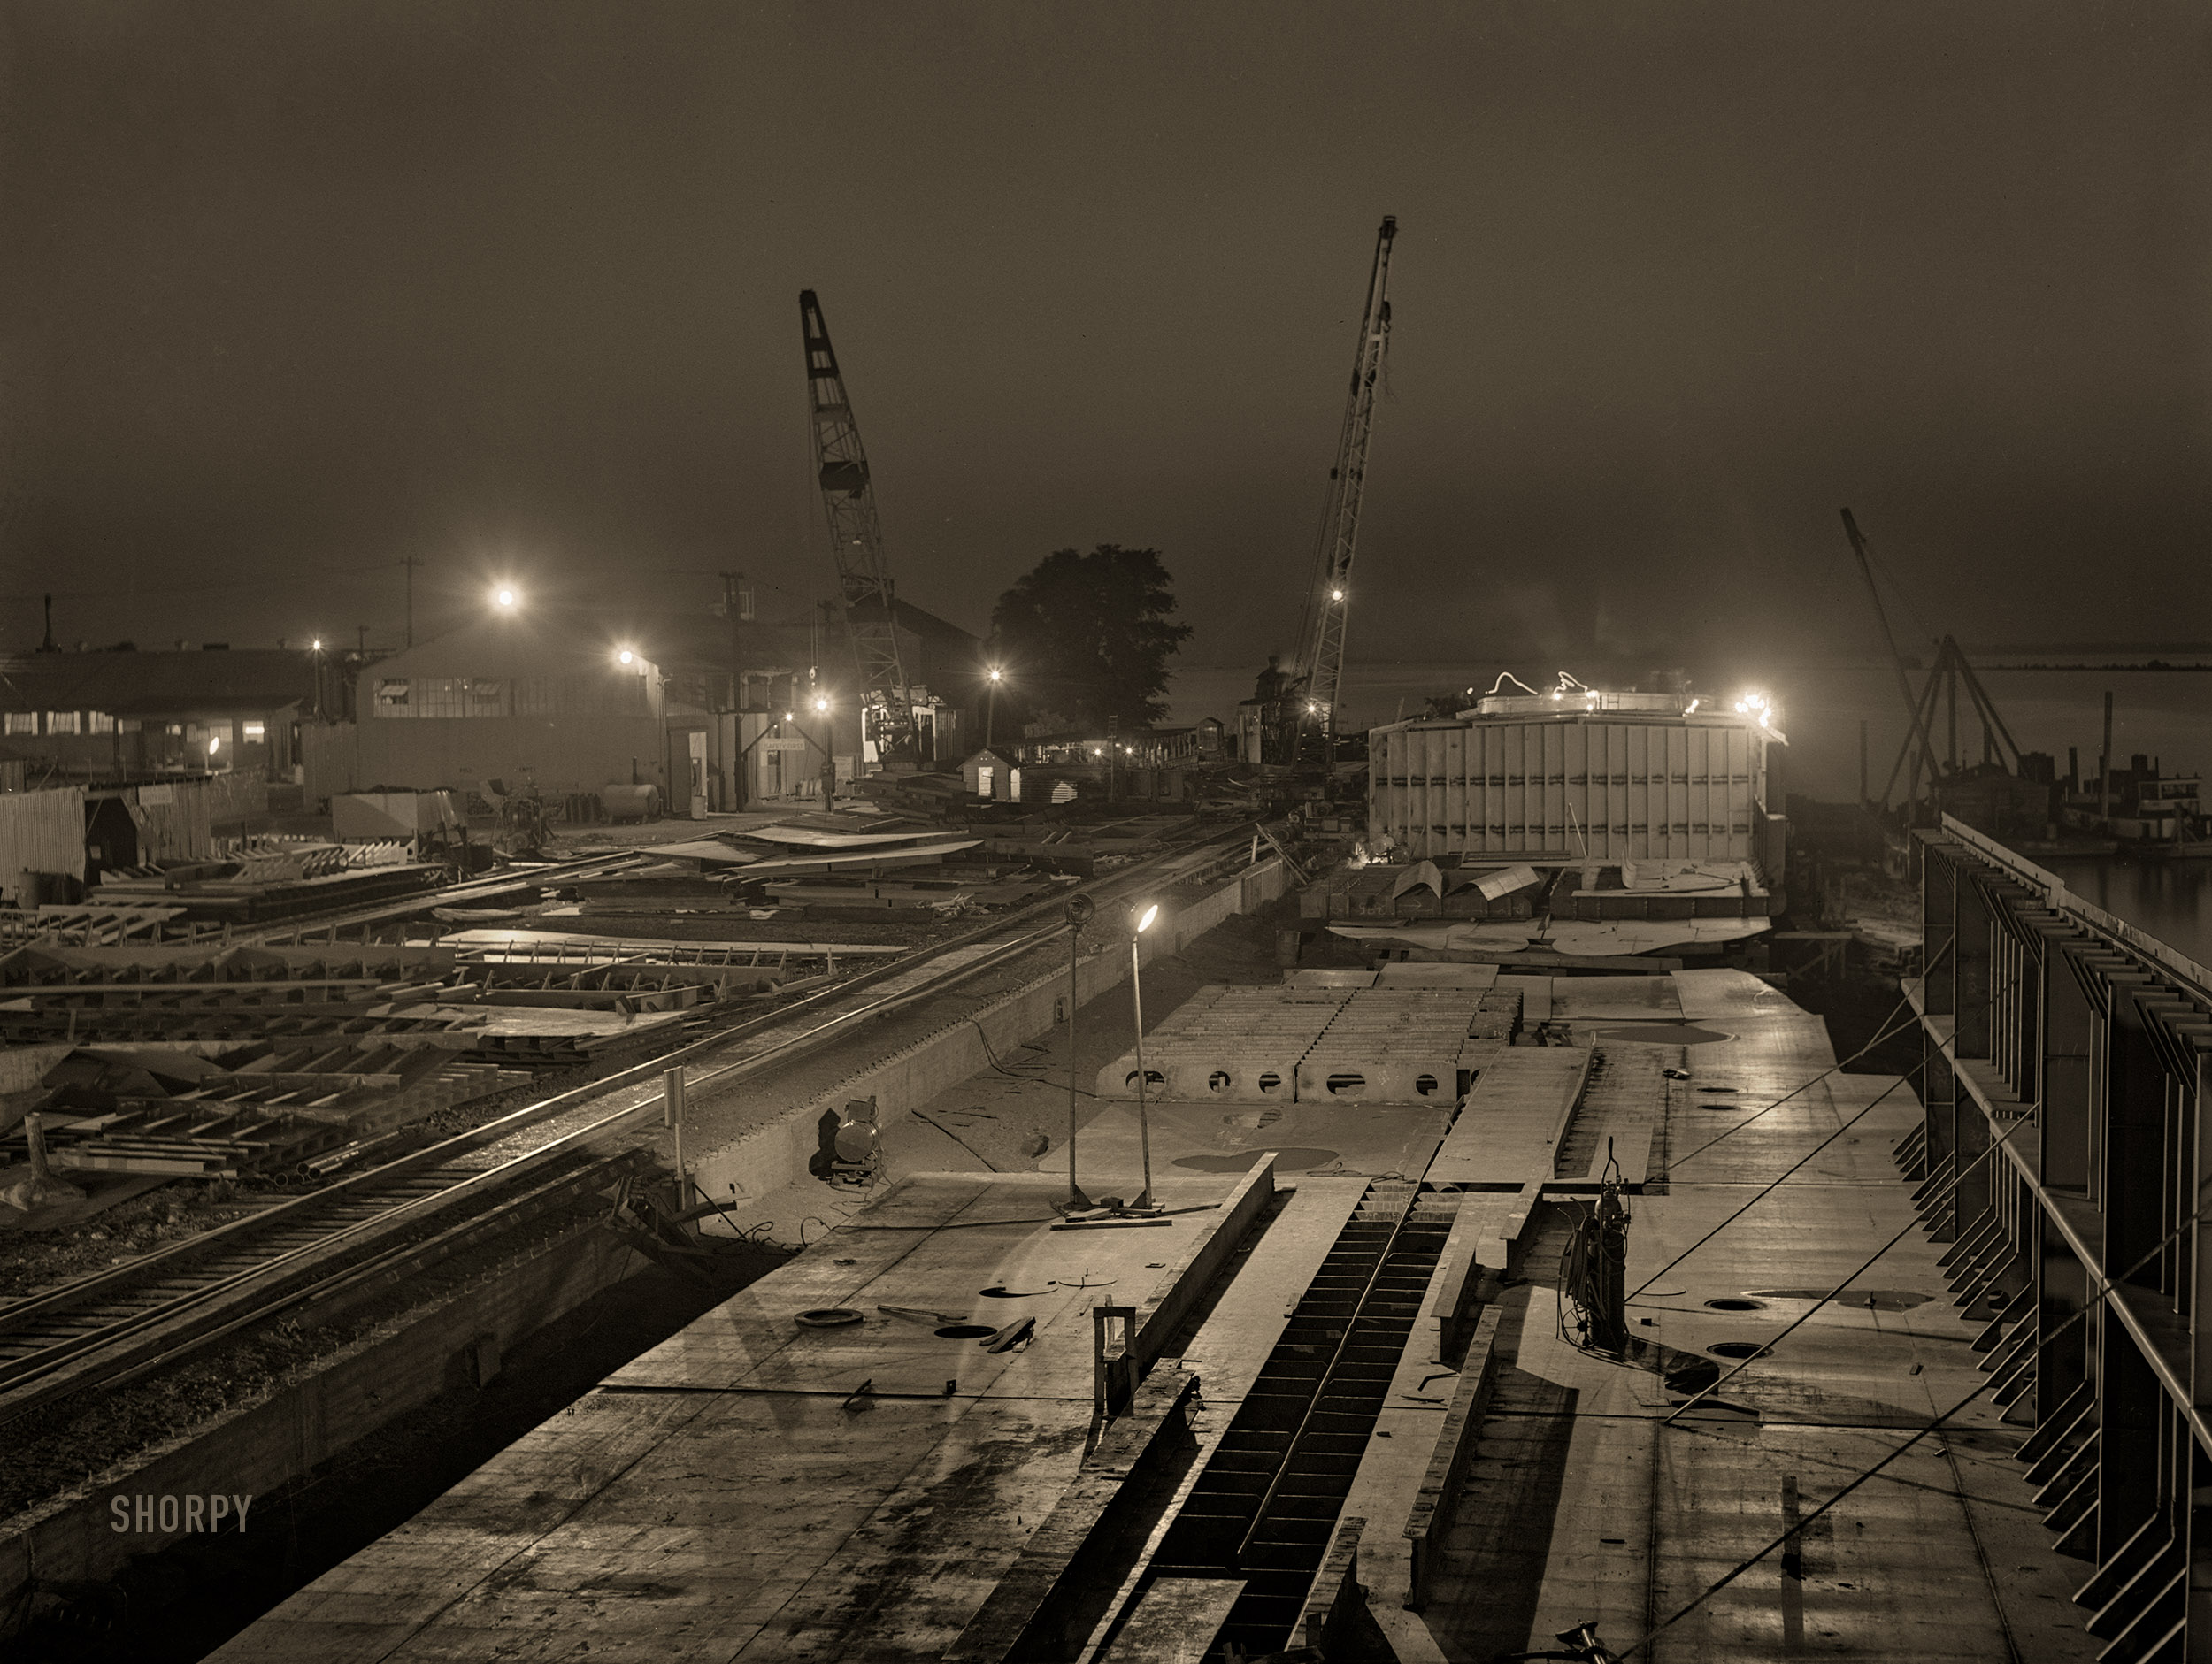 July 1942. "Decatur, Alabama. Ingalls Shipbuilding Company. Construction of ocean-going barges for the U.S. Army. Work goes on twenty-four hours a day." Medium format acetate negative by Jack Delano for the Office of War Information. View full size.